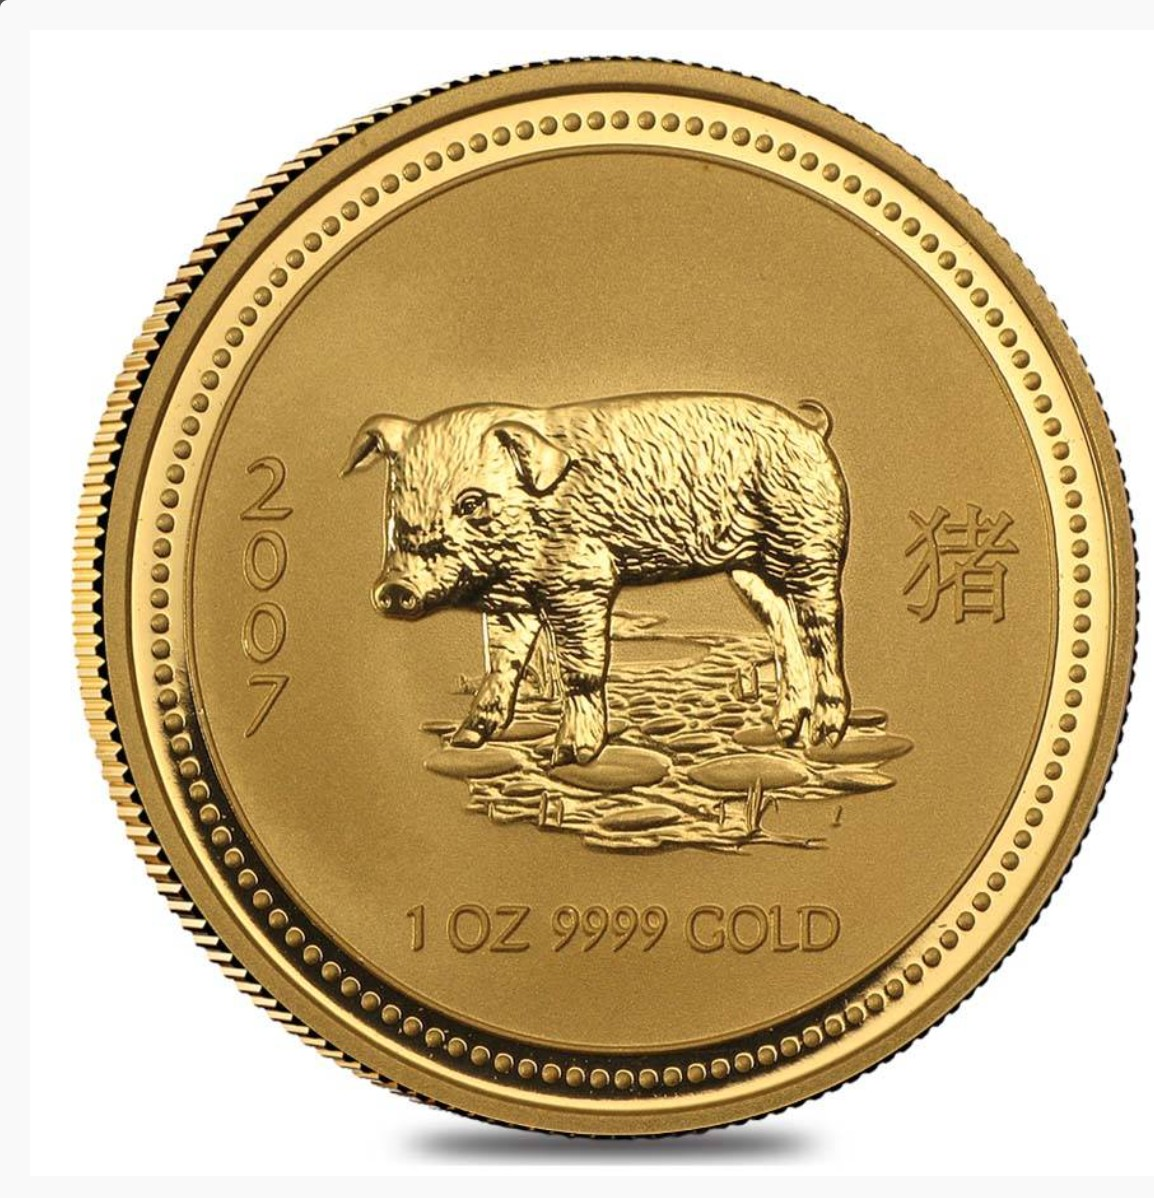 CNY Gold Coin - Pig